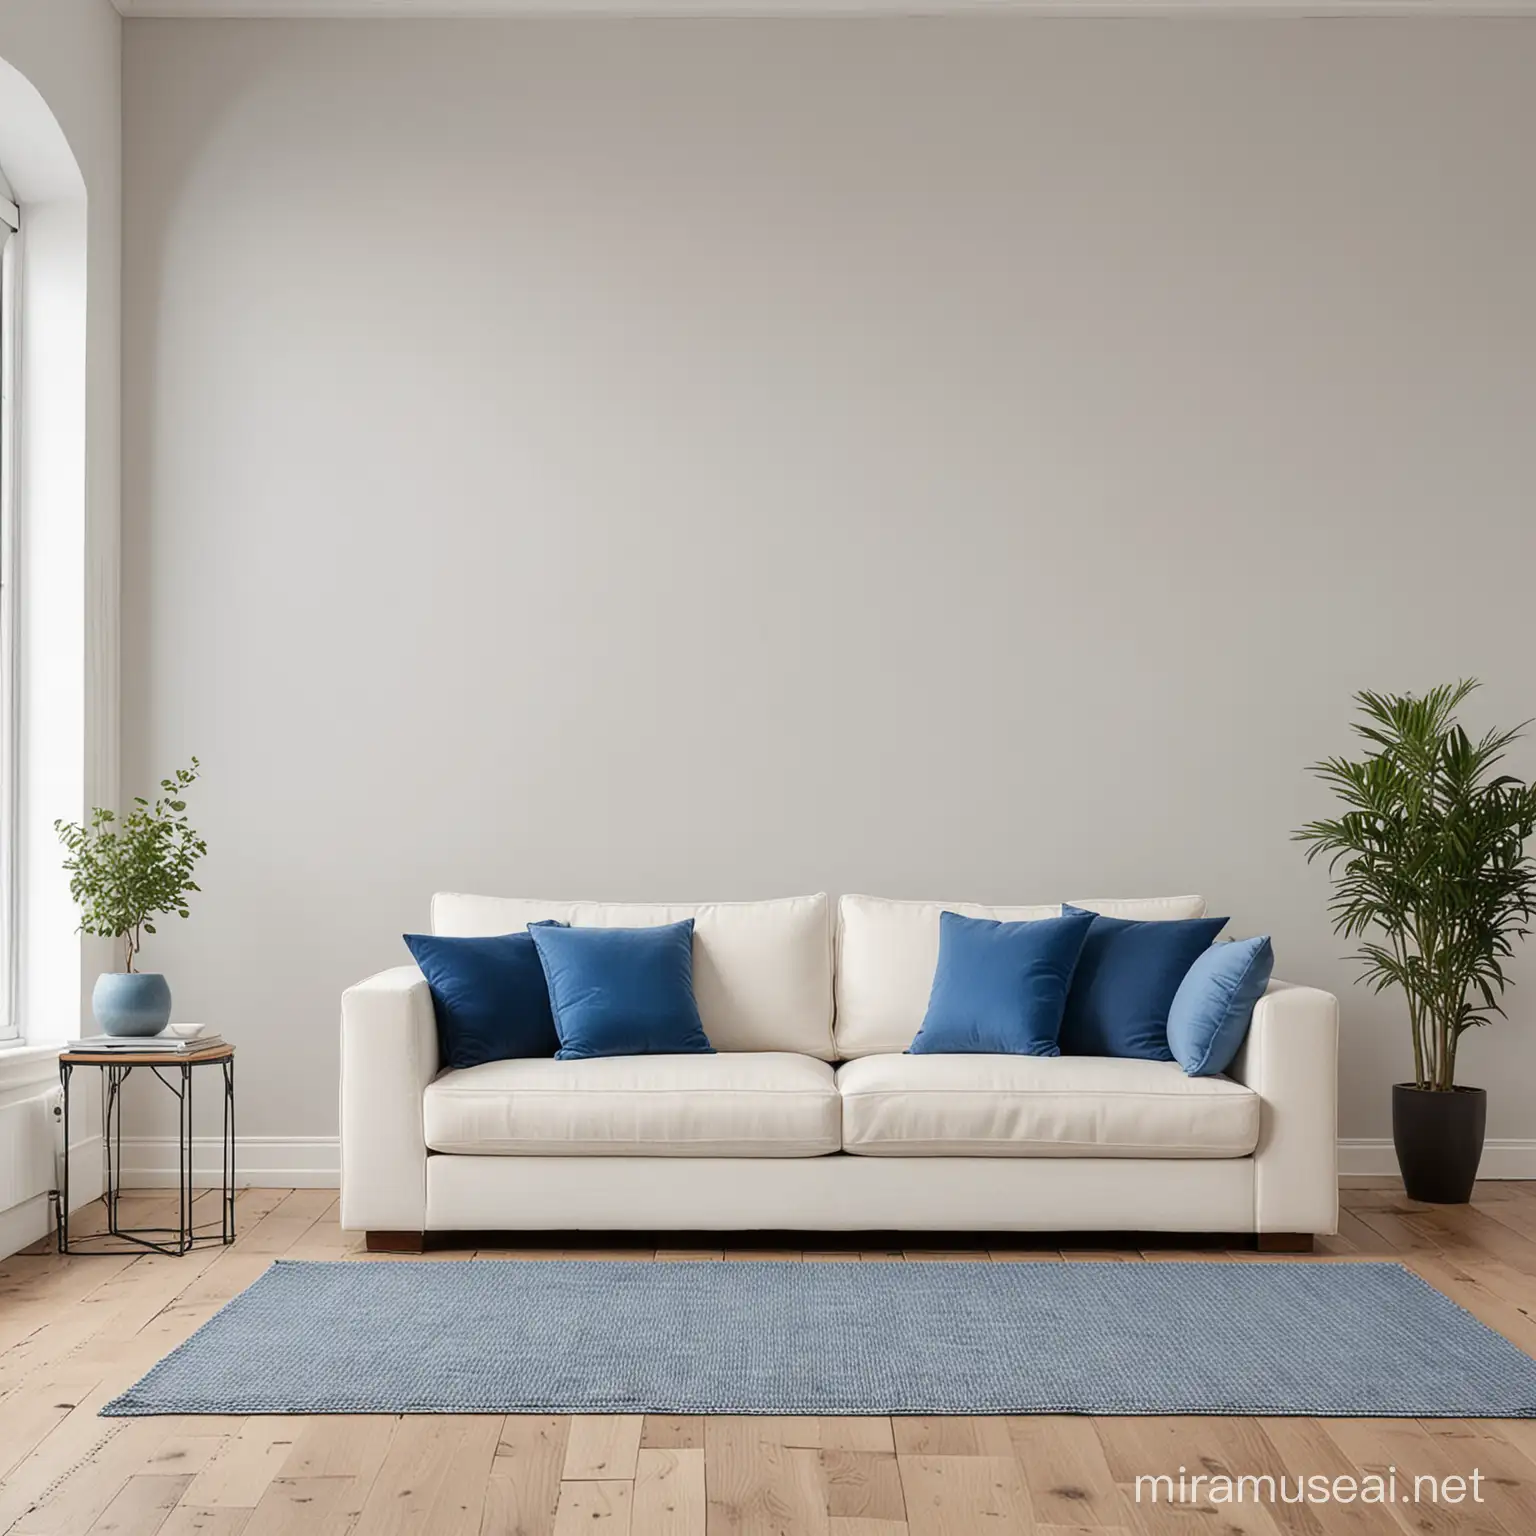 a white sofa with blue pillows in a living room against a plain light grey wall, window to the left and wooden floor